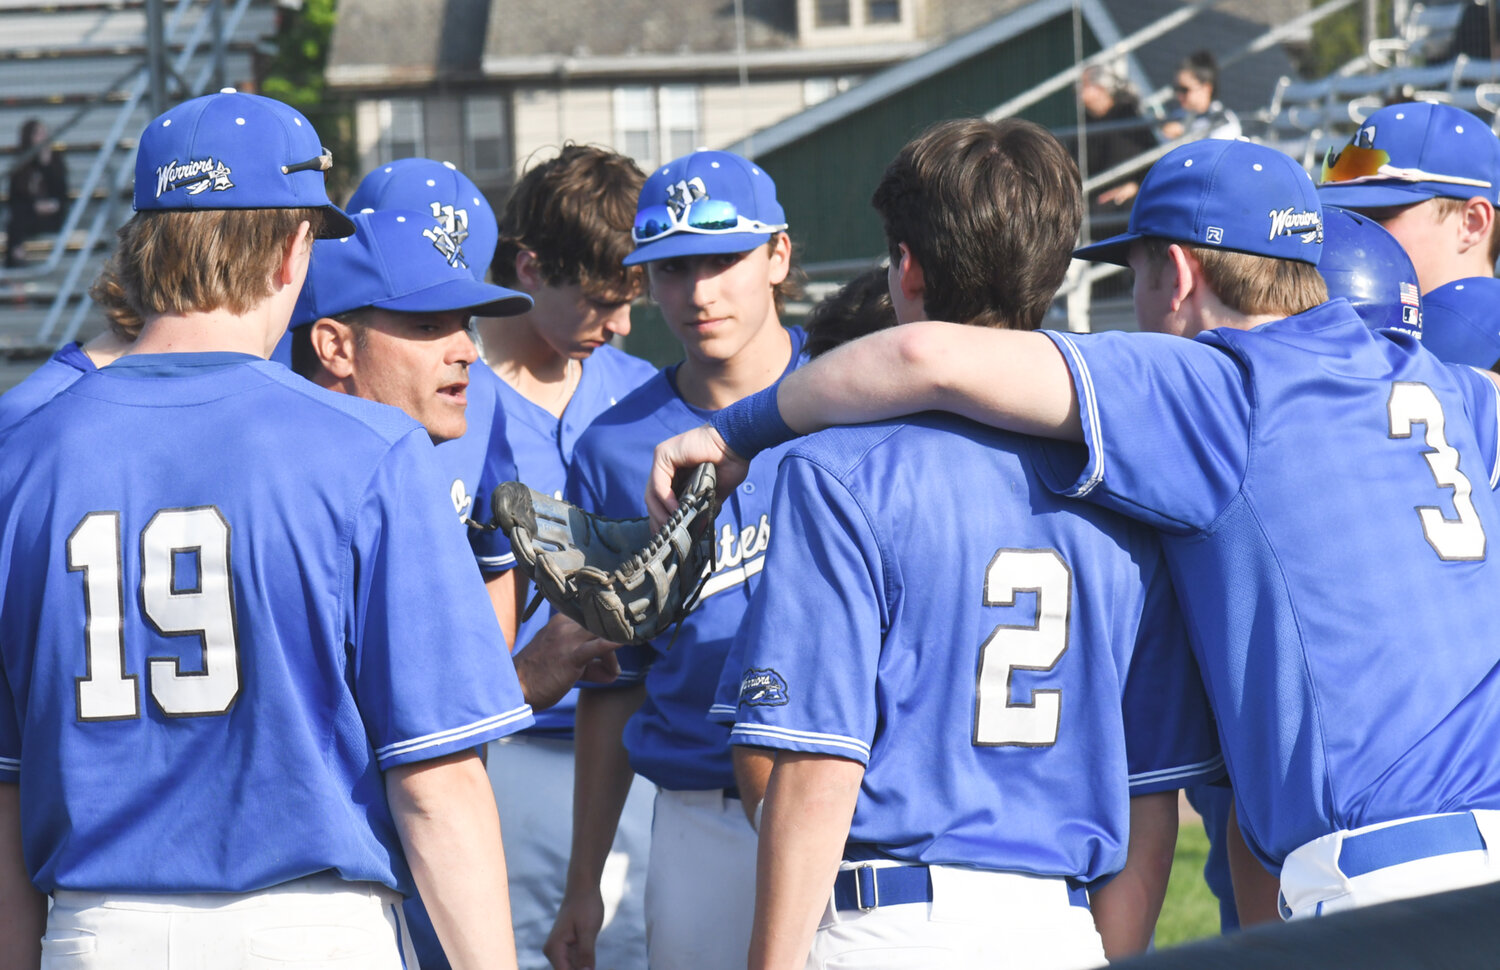 Whitesboro coach Tom Maggiolino talks to his team during a game last week against Proctor. Whitesboro is the top seed in the Section III A Class tournament.